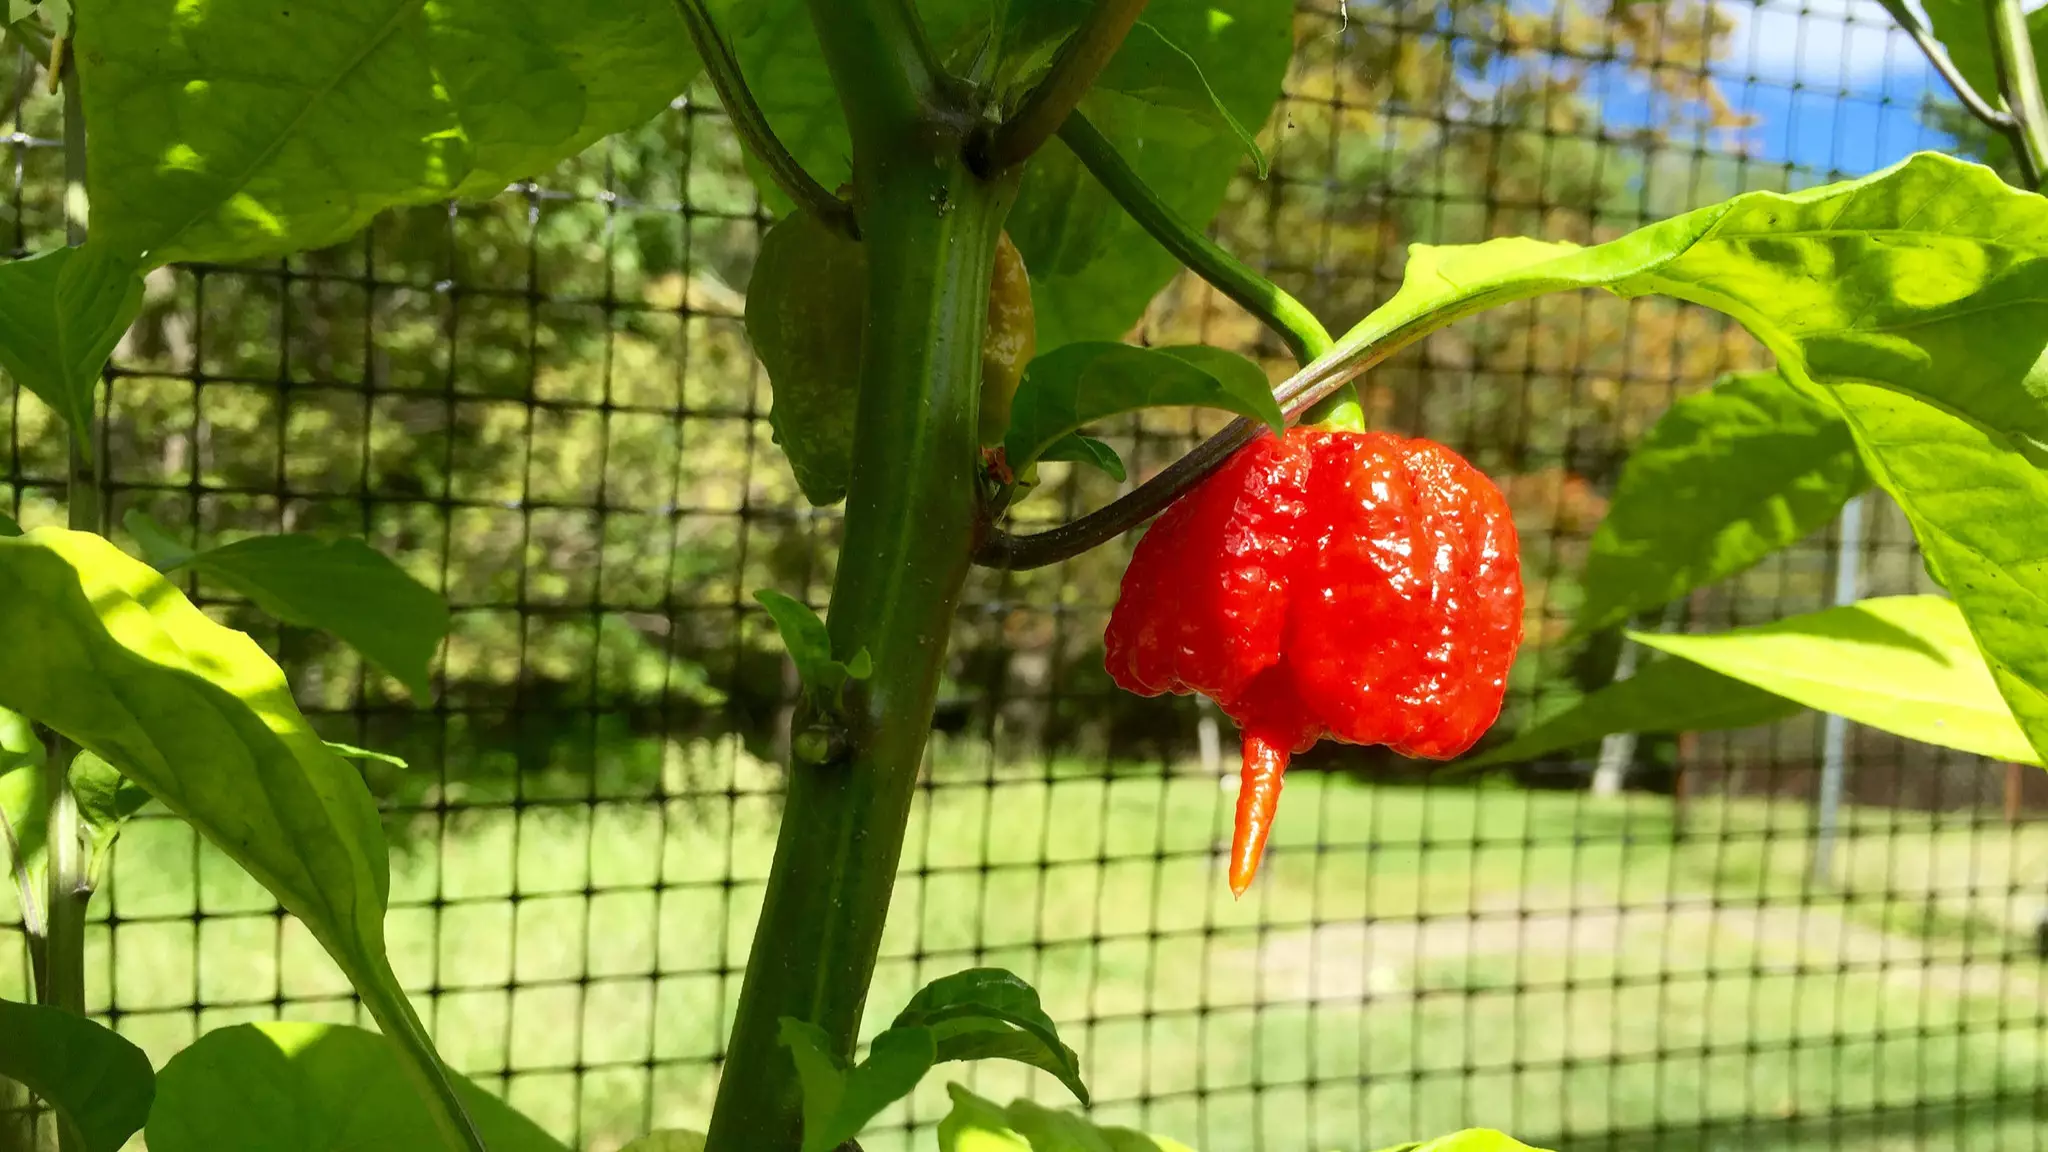 American Man Hospitalised After Eating The World's Hottest Chilli Pepper